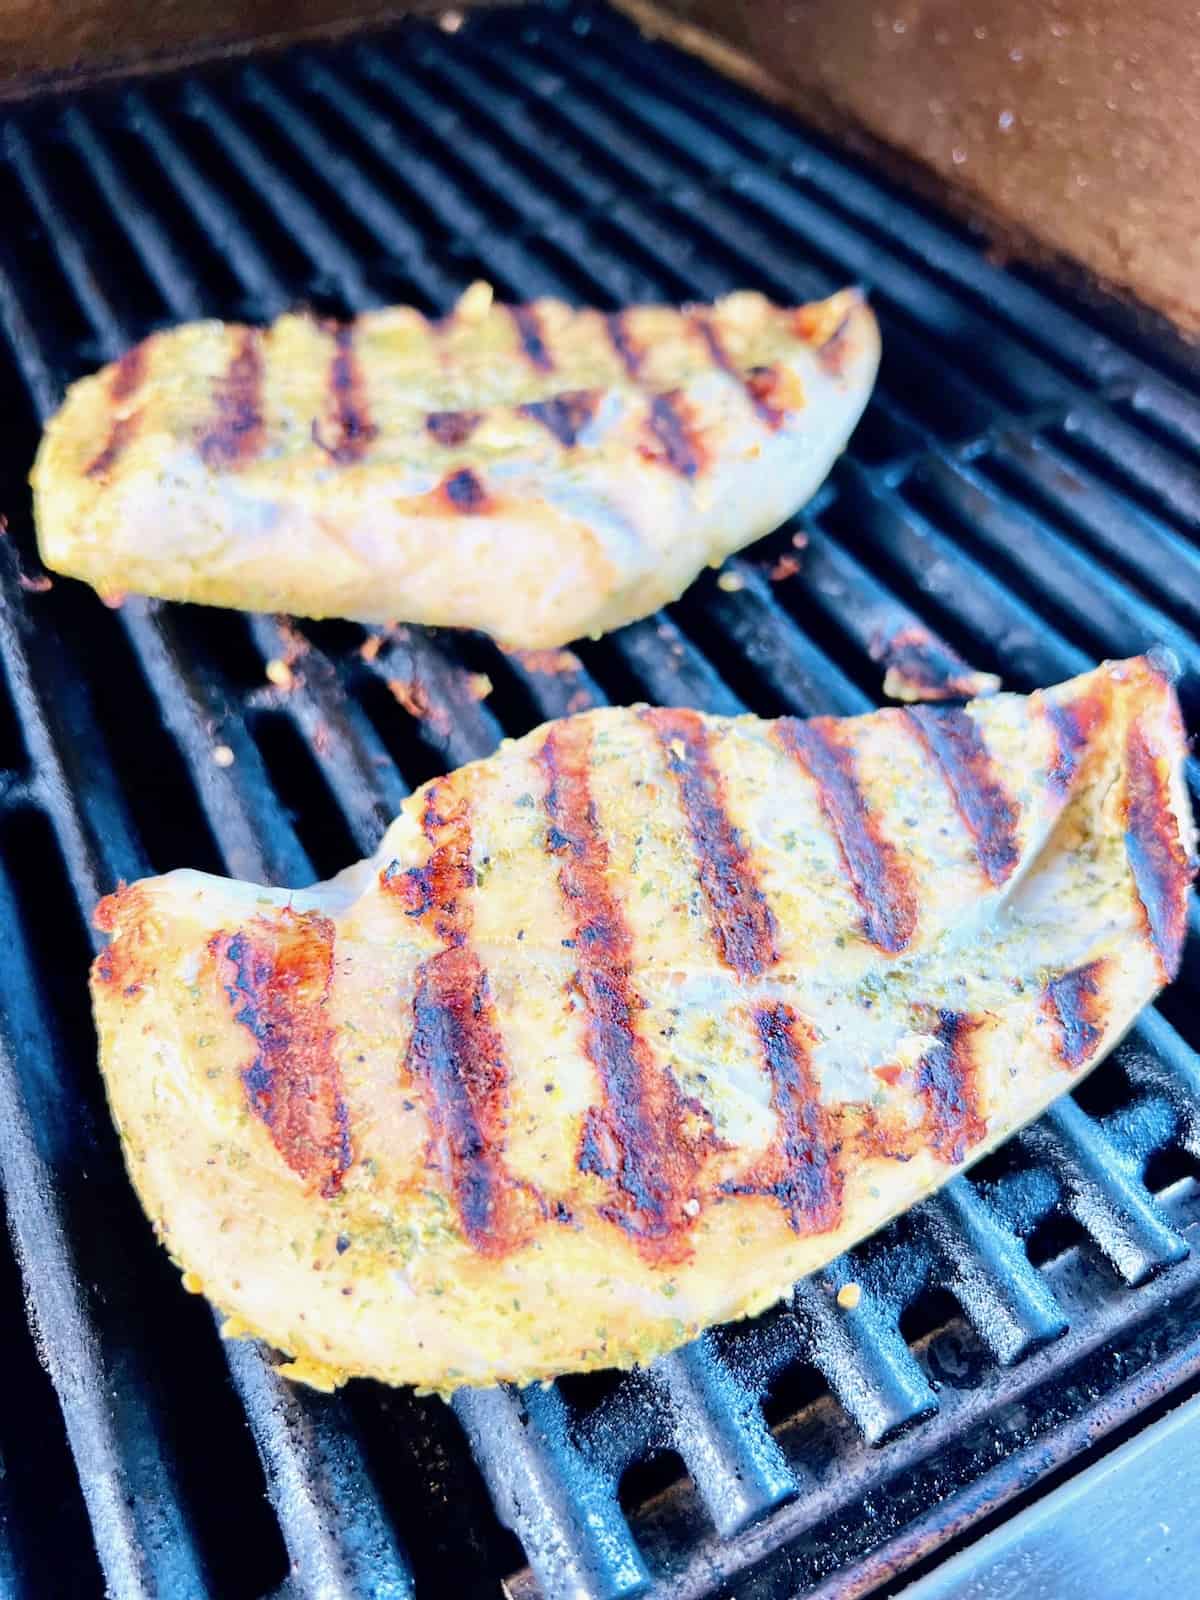 Grilled BBQ Chicken Breasts Grill marks shown when flipped over